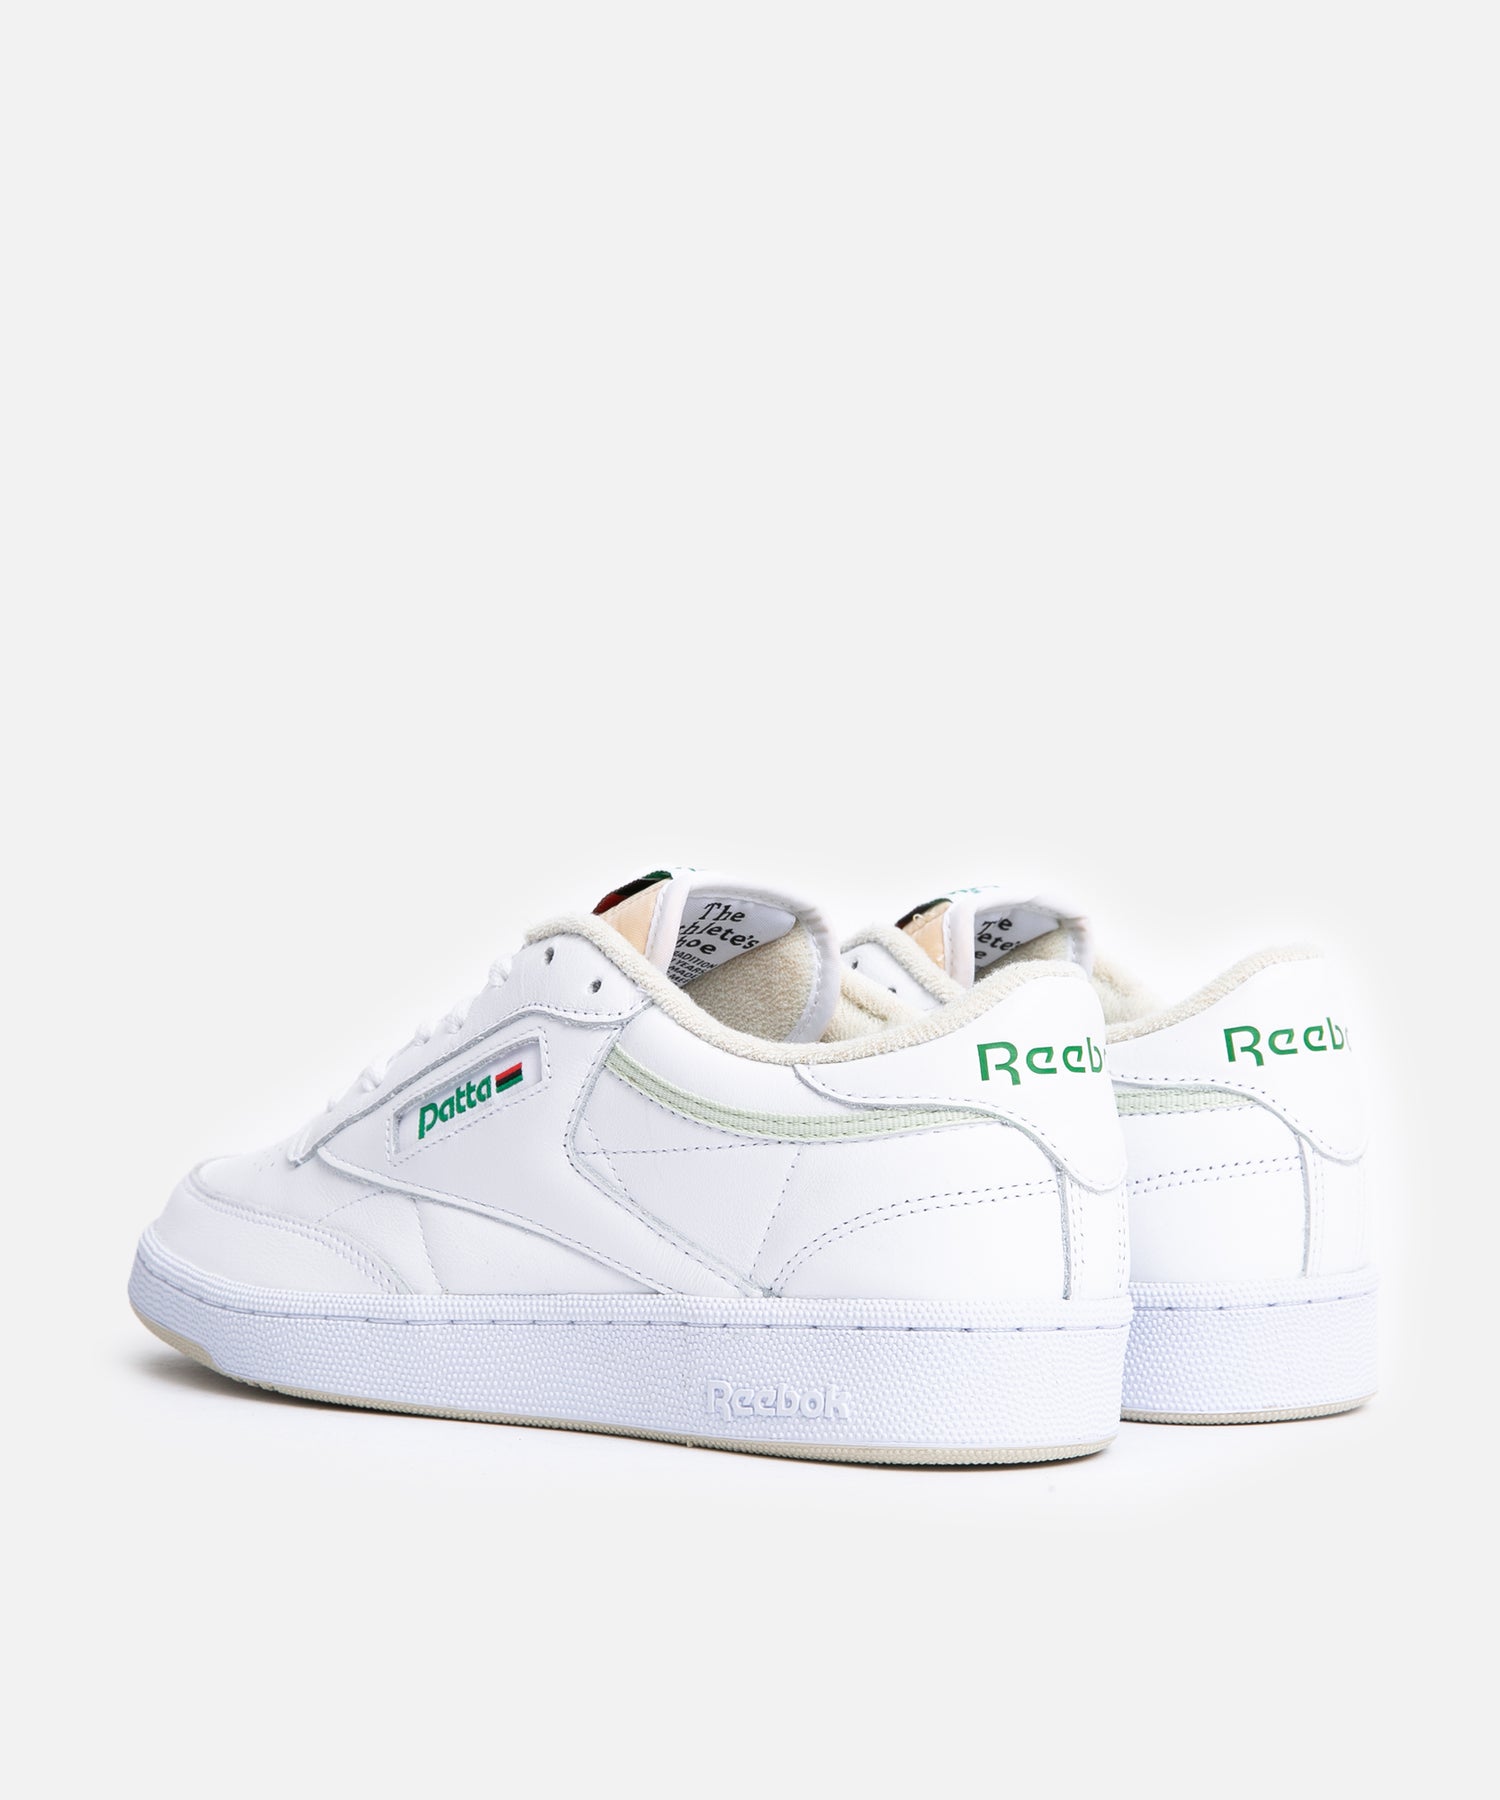 IN-STORE EXCLUSIVE: Patta x Reebok Club C (White/Cool Sage/Paper Wh